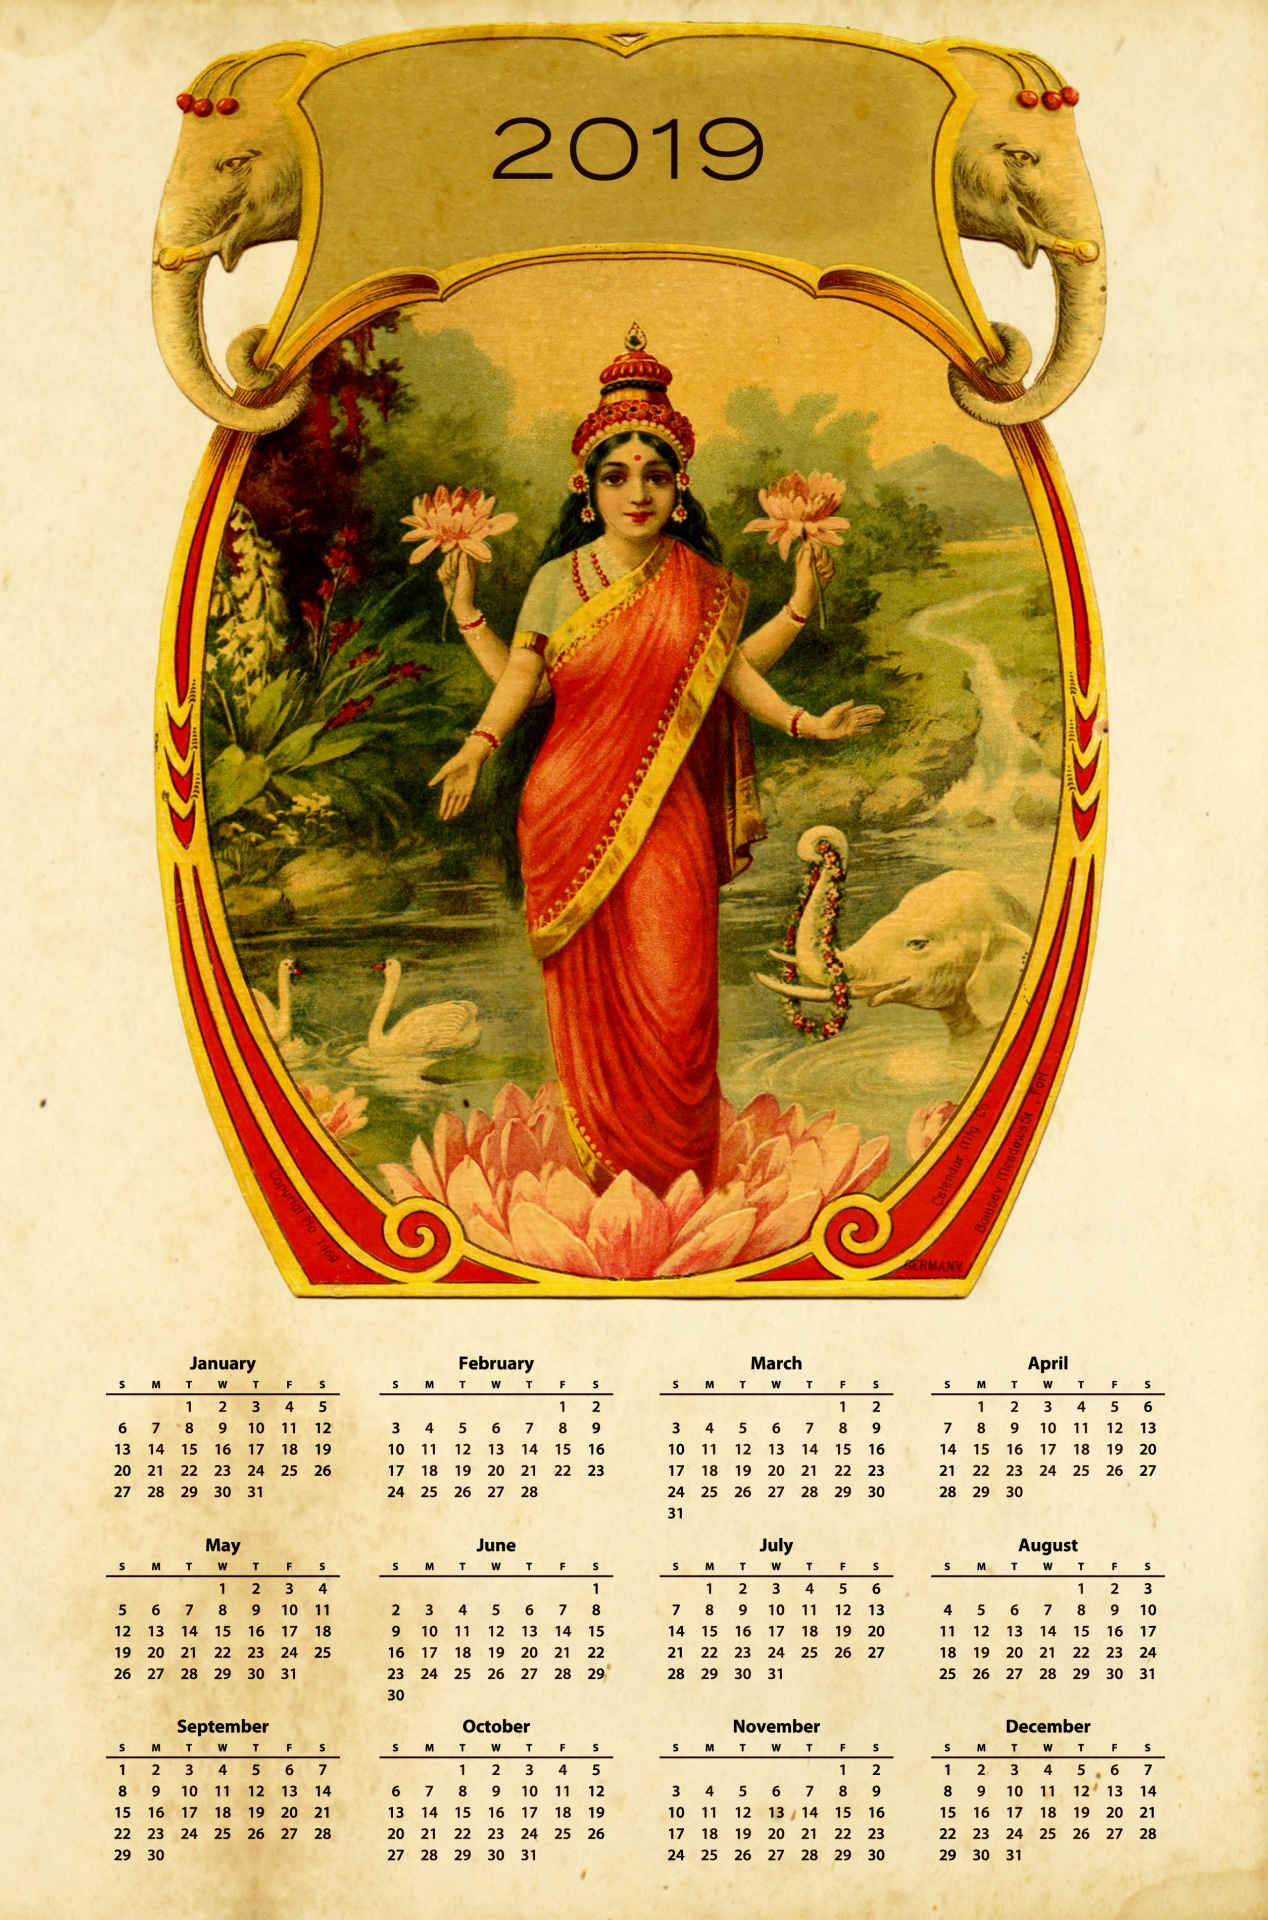 2019-calendar-indian-goddess-free-stock-photo-public-domain-pictures